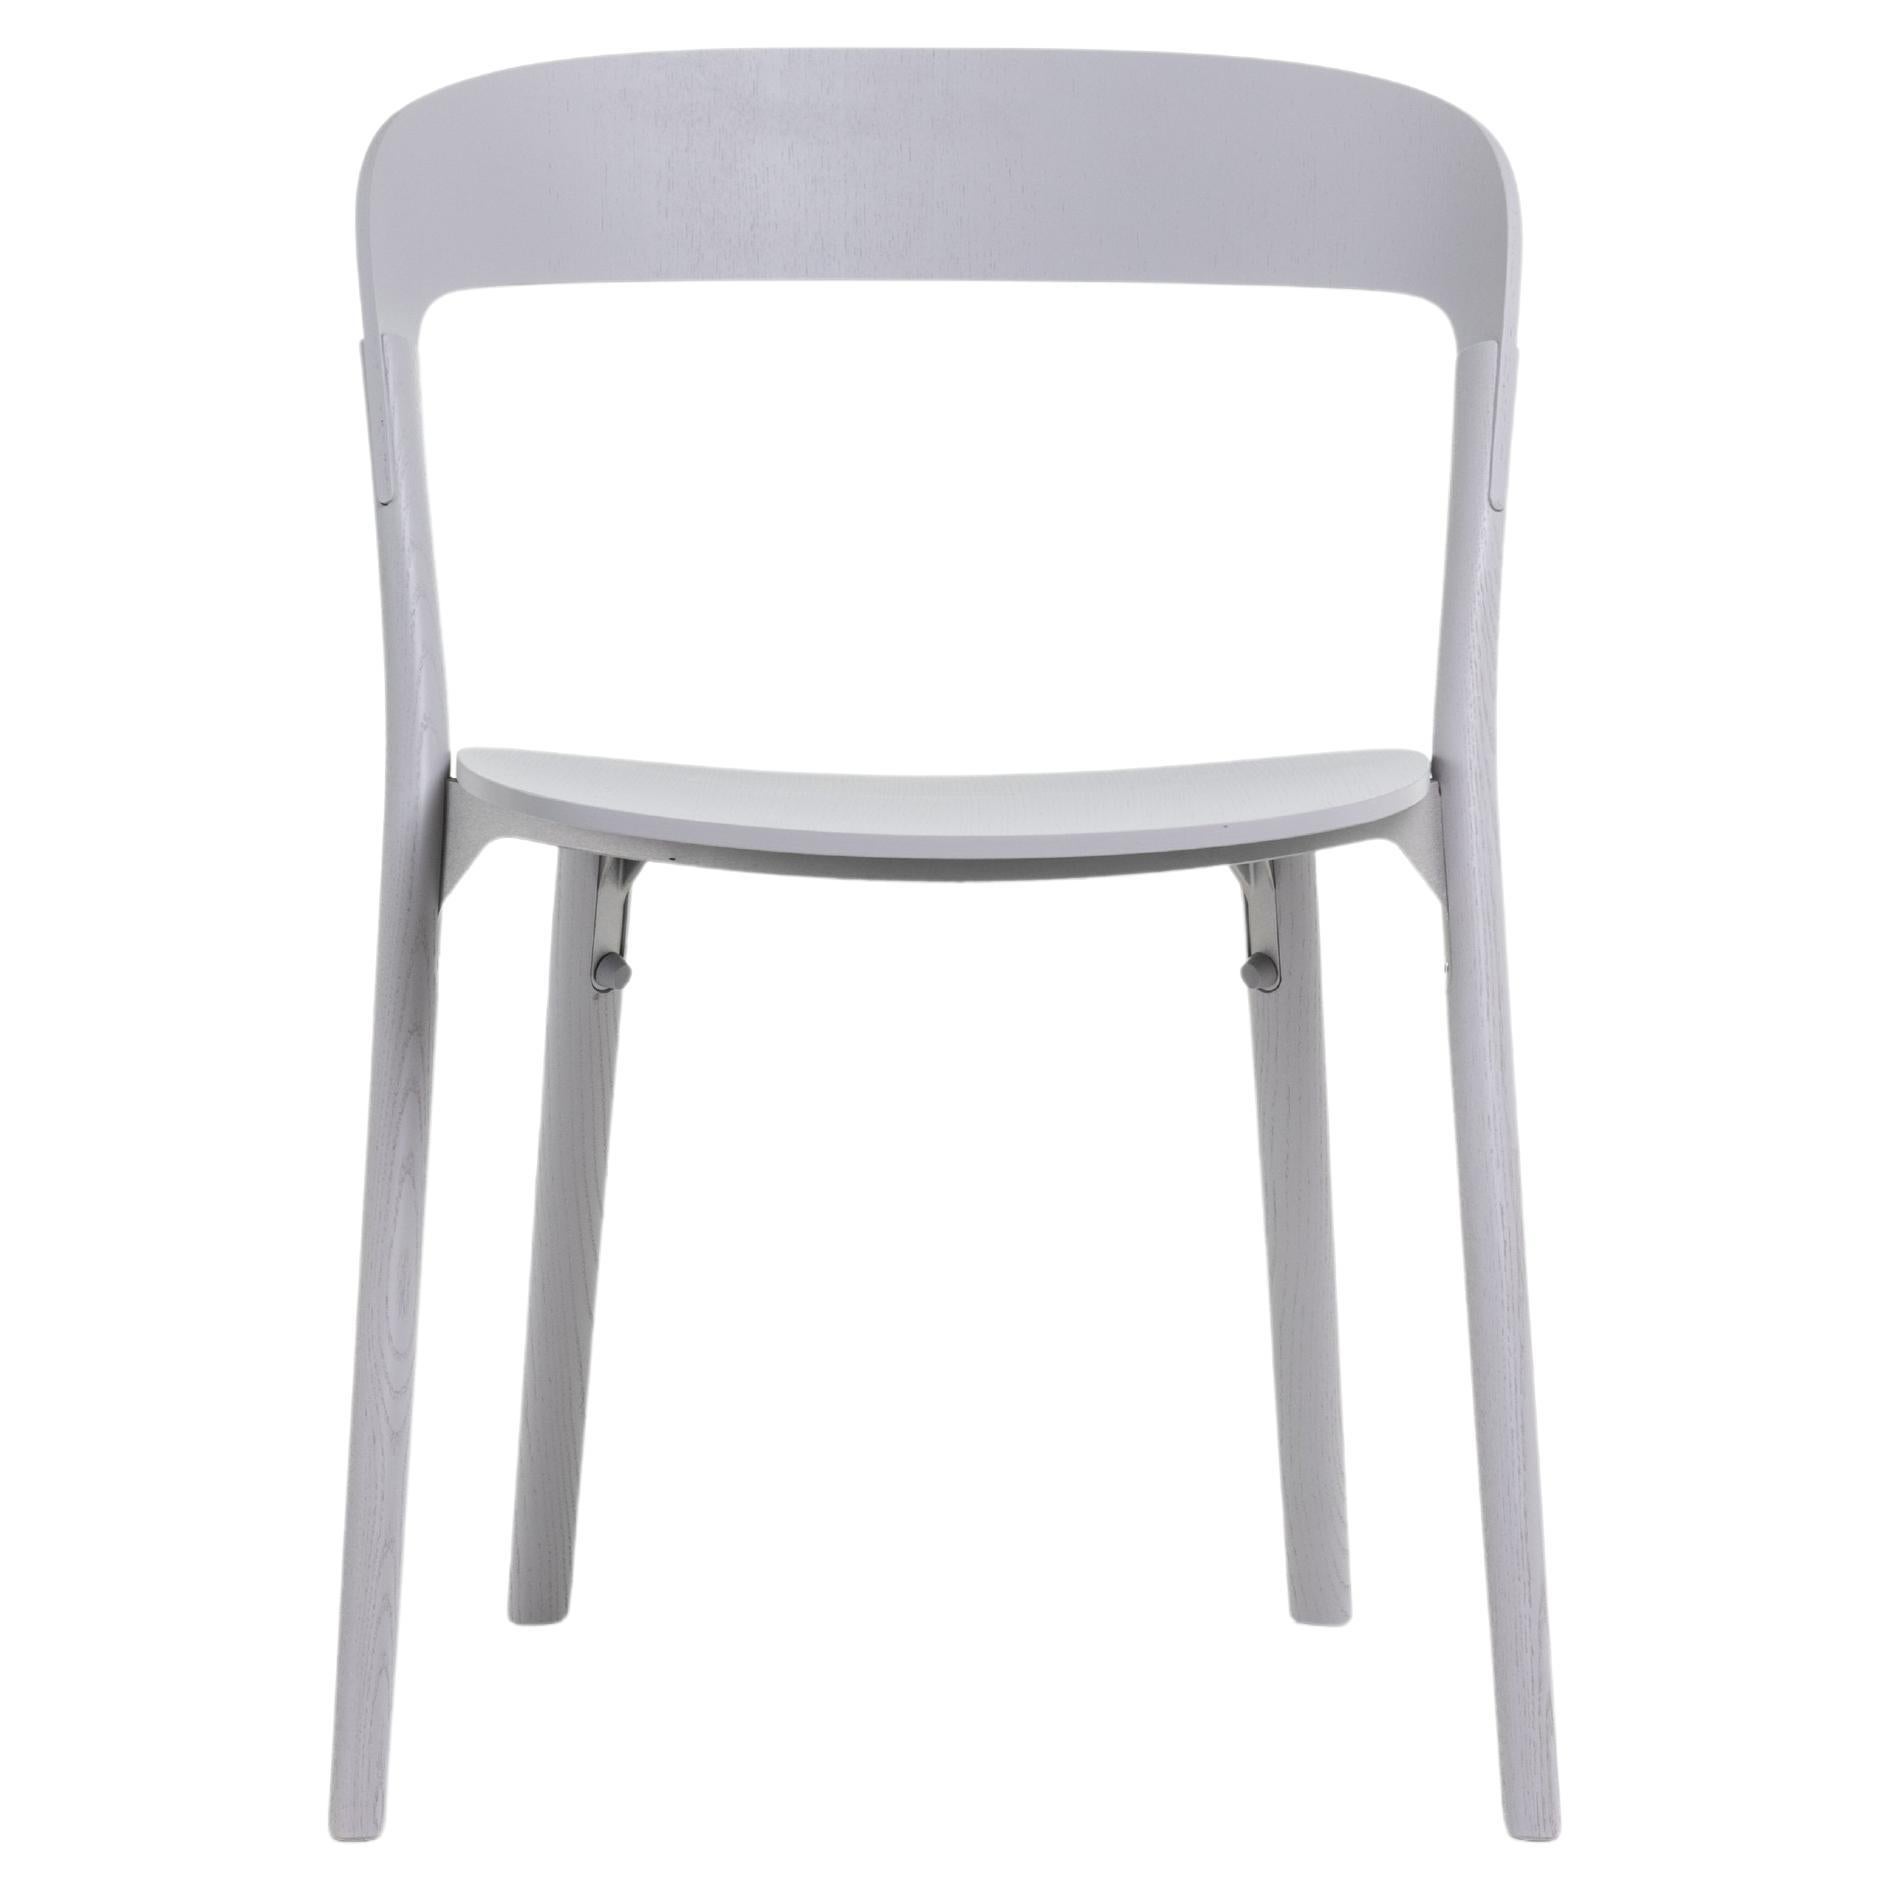 Set of 2 Pila Stacking Chair by Ronan & Erwan Boroullec for MAGIS For Sale